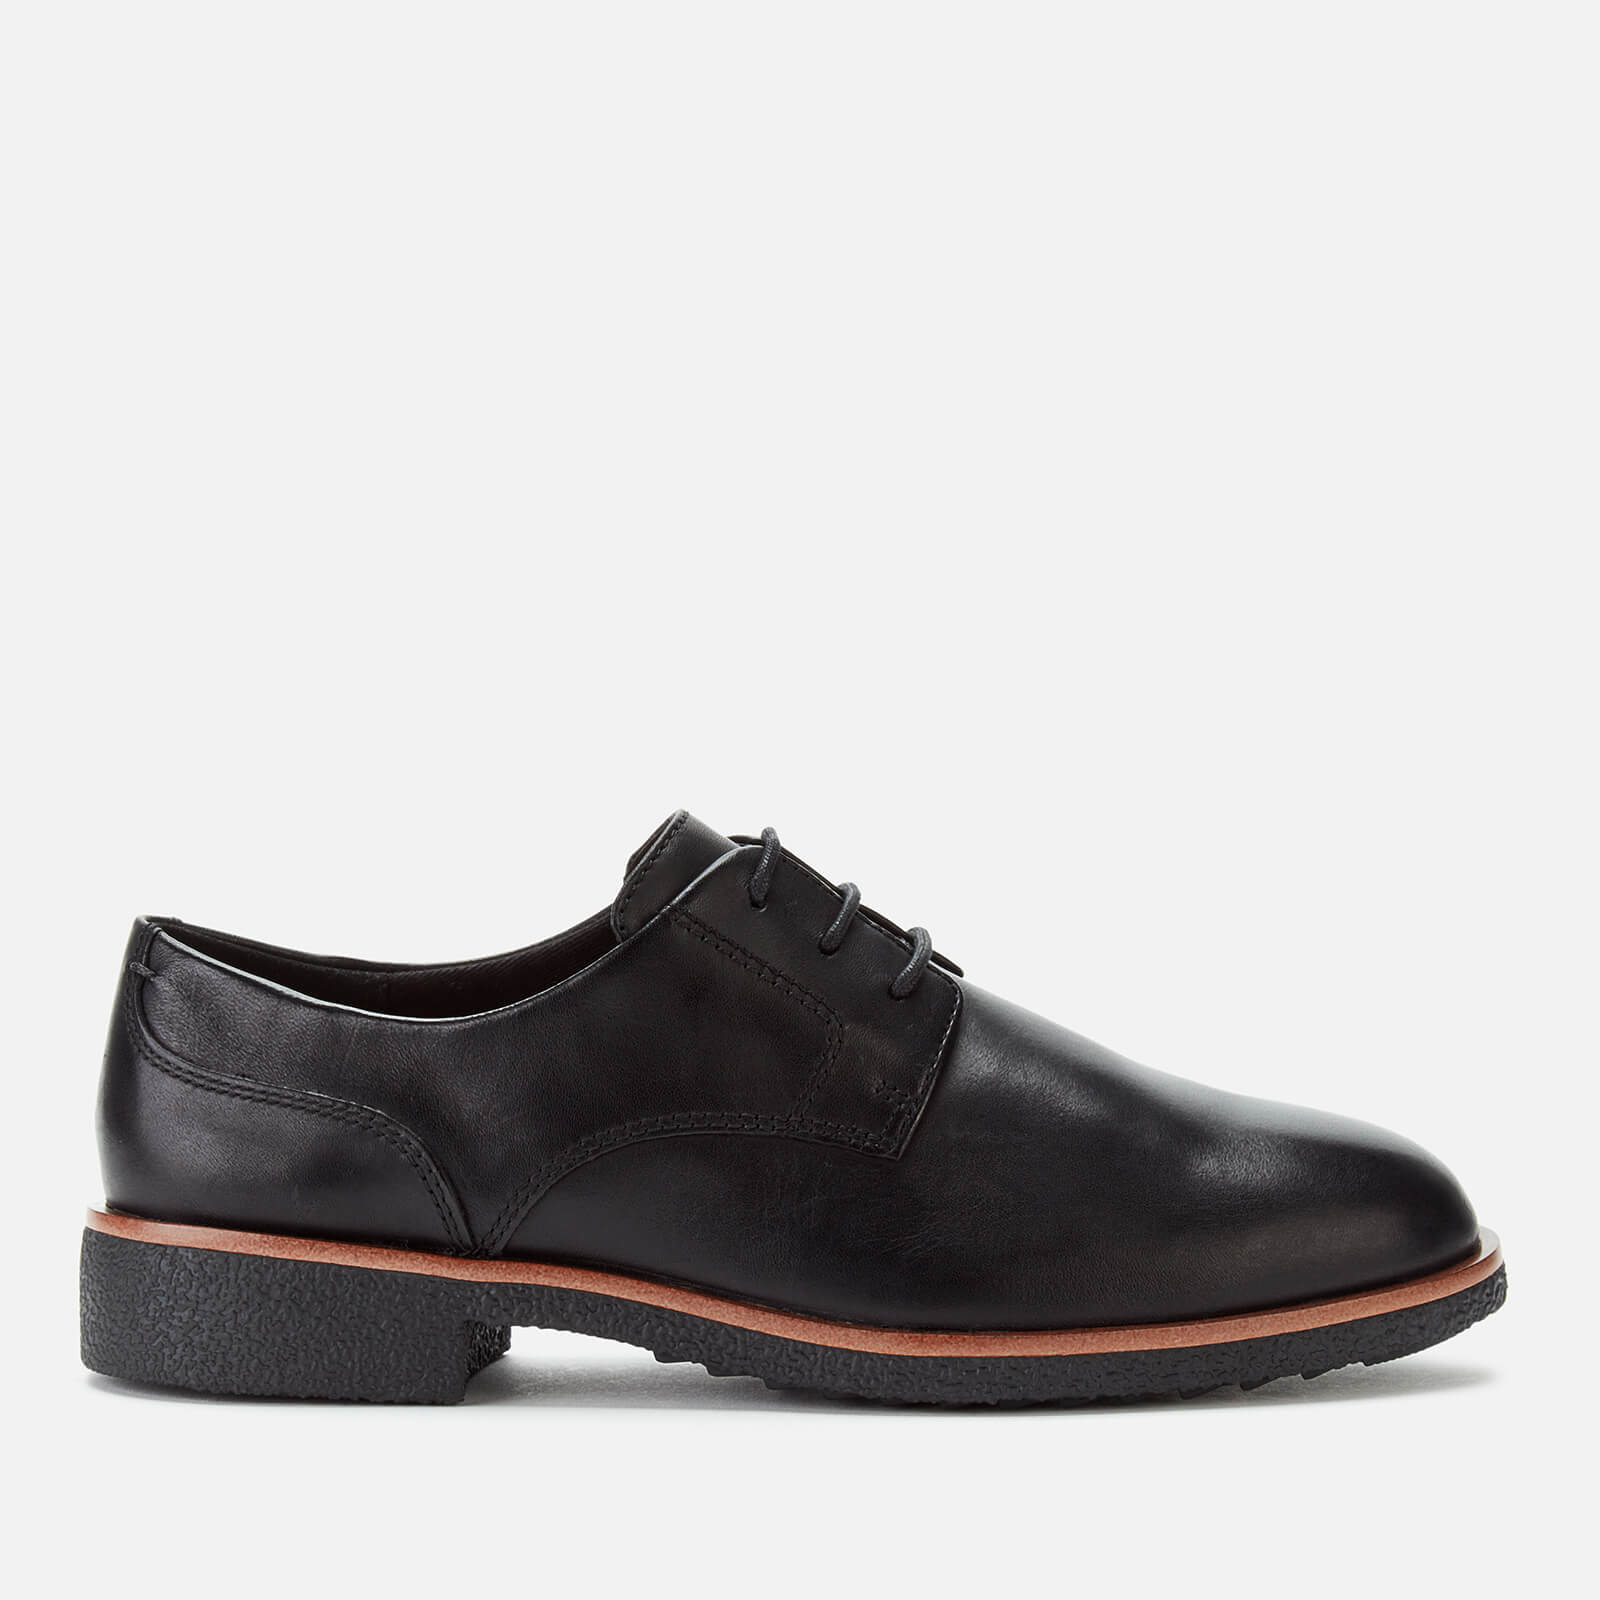 Image of Clarks Women's Griffin Lane Leather Derby Shoes - Black - UK 3